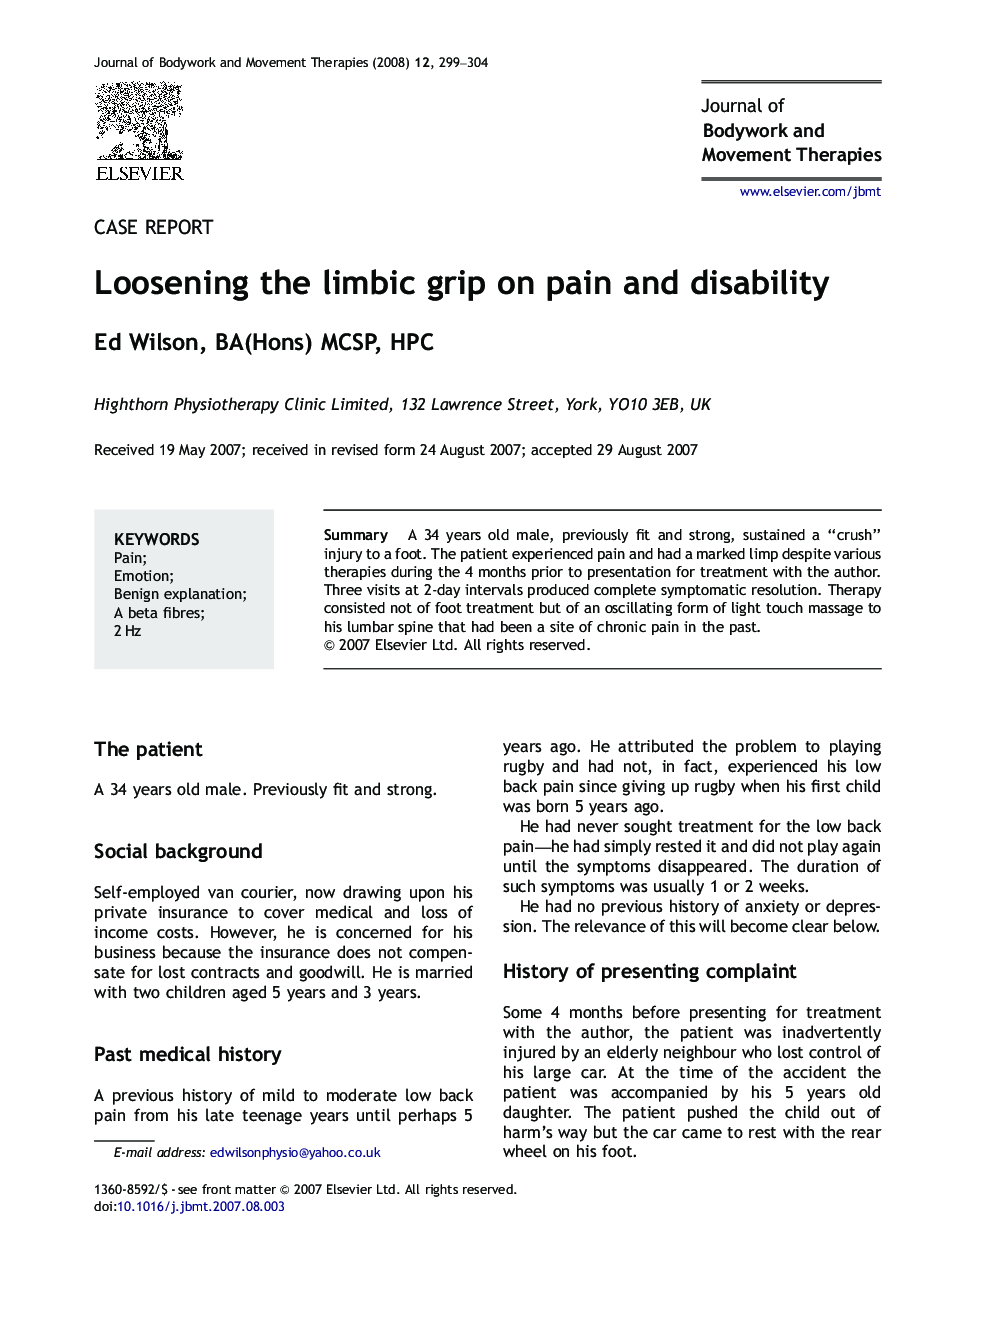 Loosening the limbic grip on pain and disability